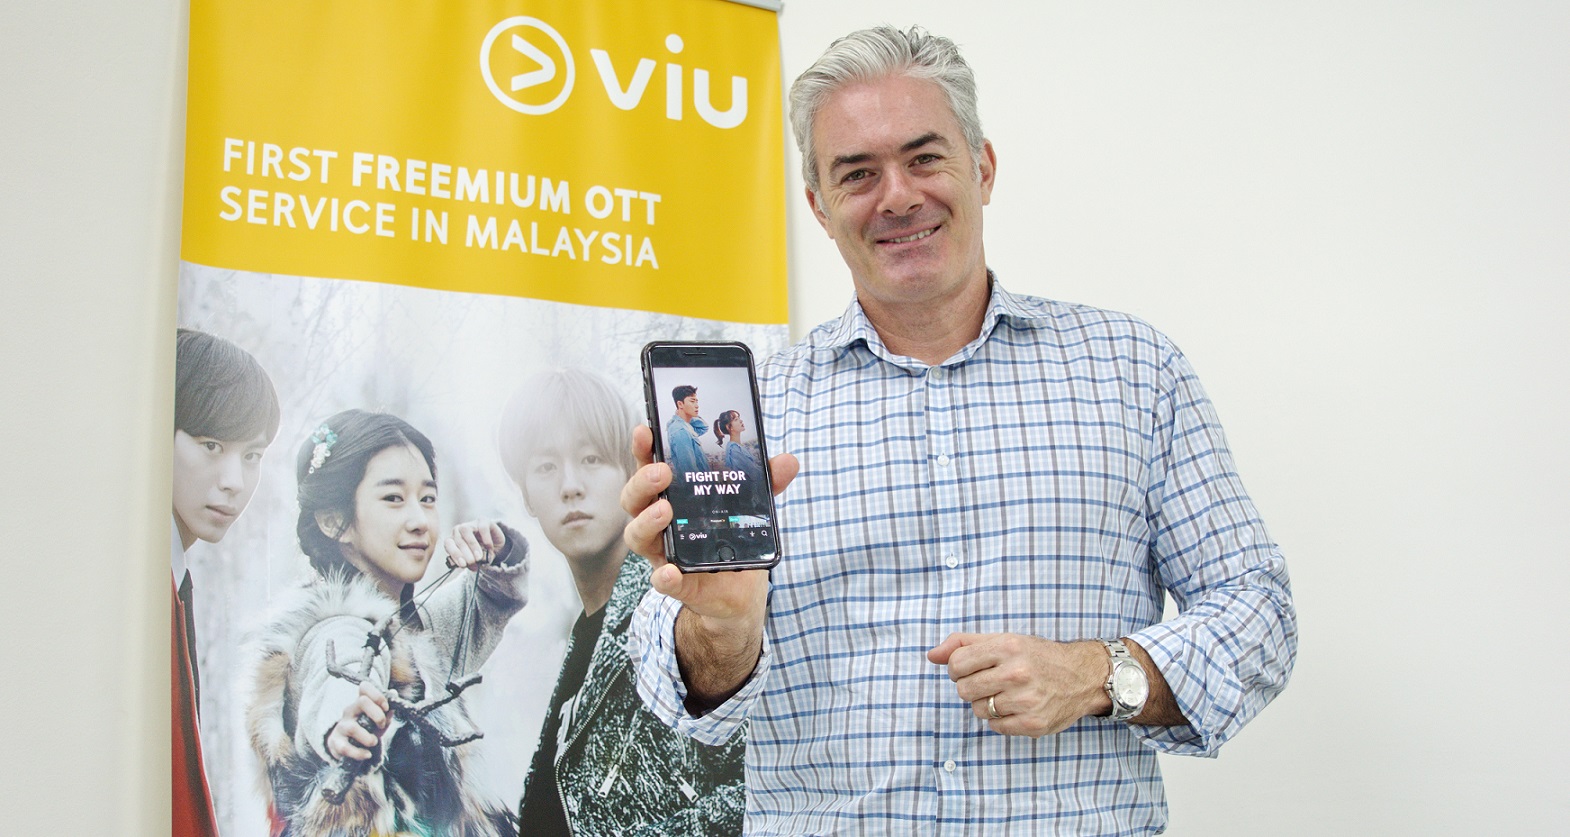 The battle for OTT supremacy rages on for Vuclip